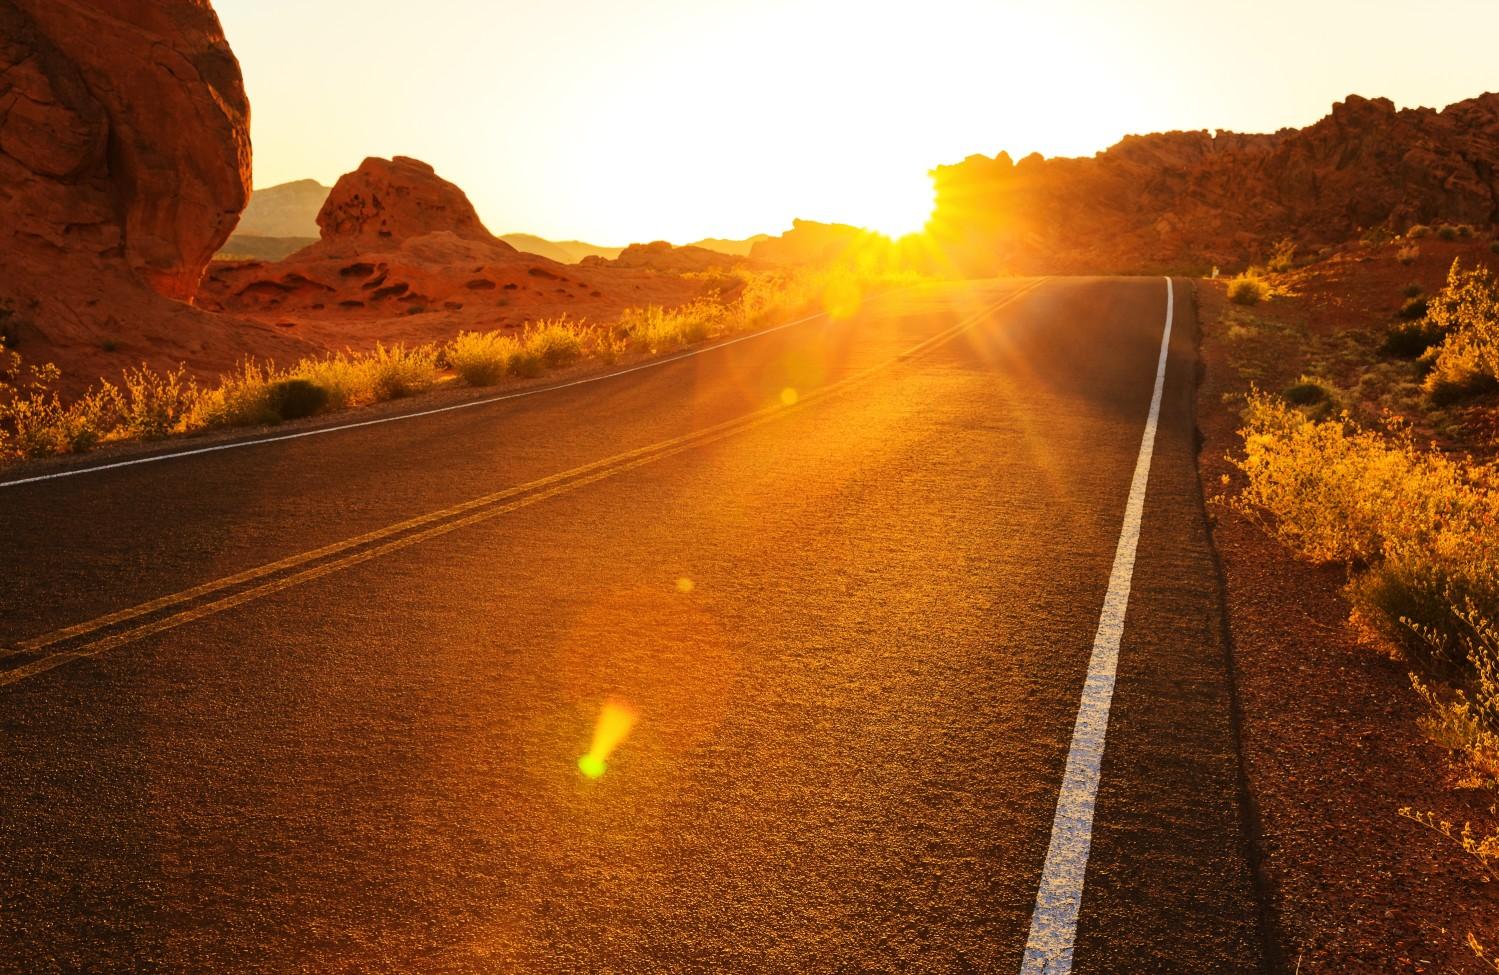 Sunset over paved road in Nevada.